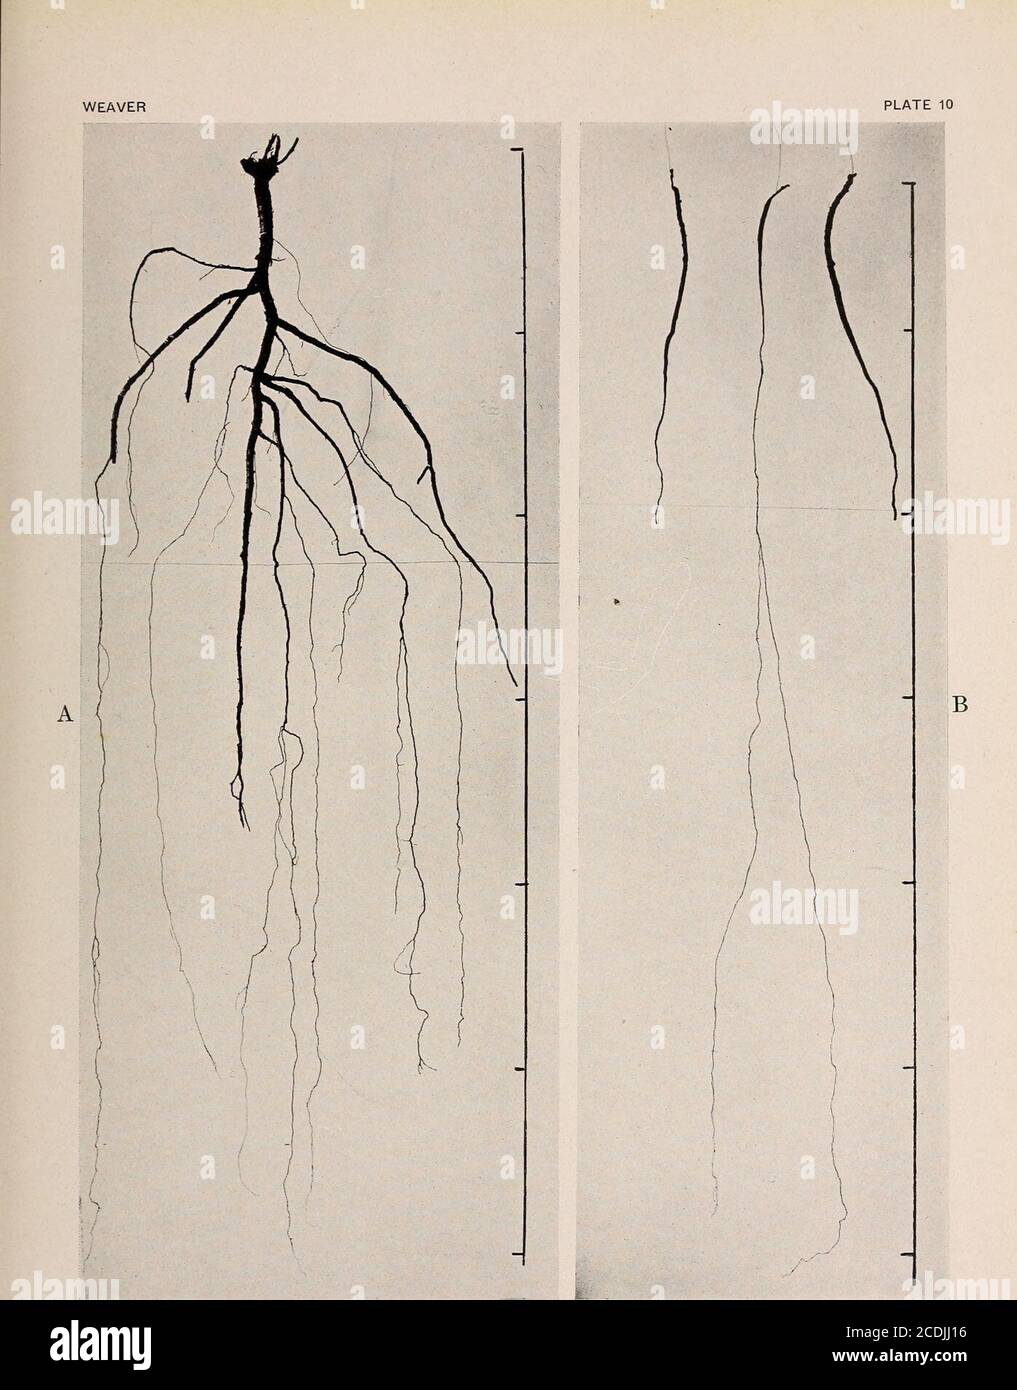 . The ecological relations of roots . A. Psoralea tenuiflora, the tap-root decayed. B. Psoralea argophylla, showing entue root in center. WEAVER PLATE 1 Stock Photo